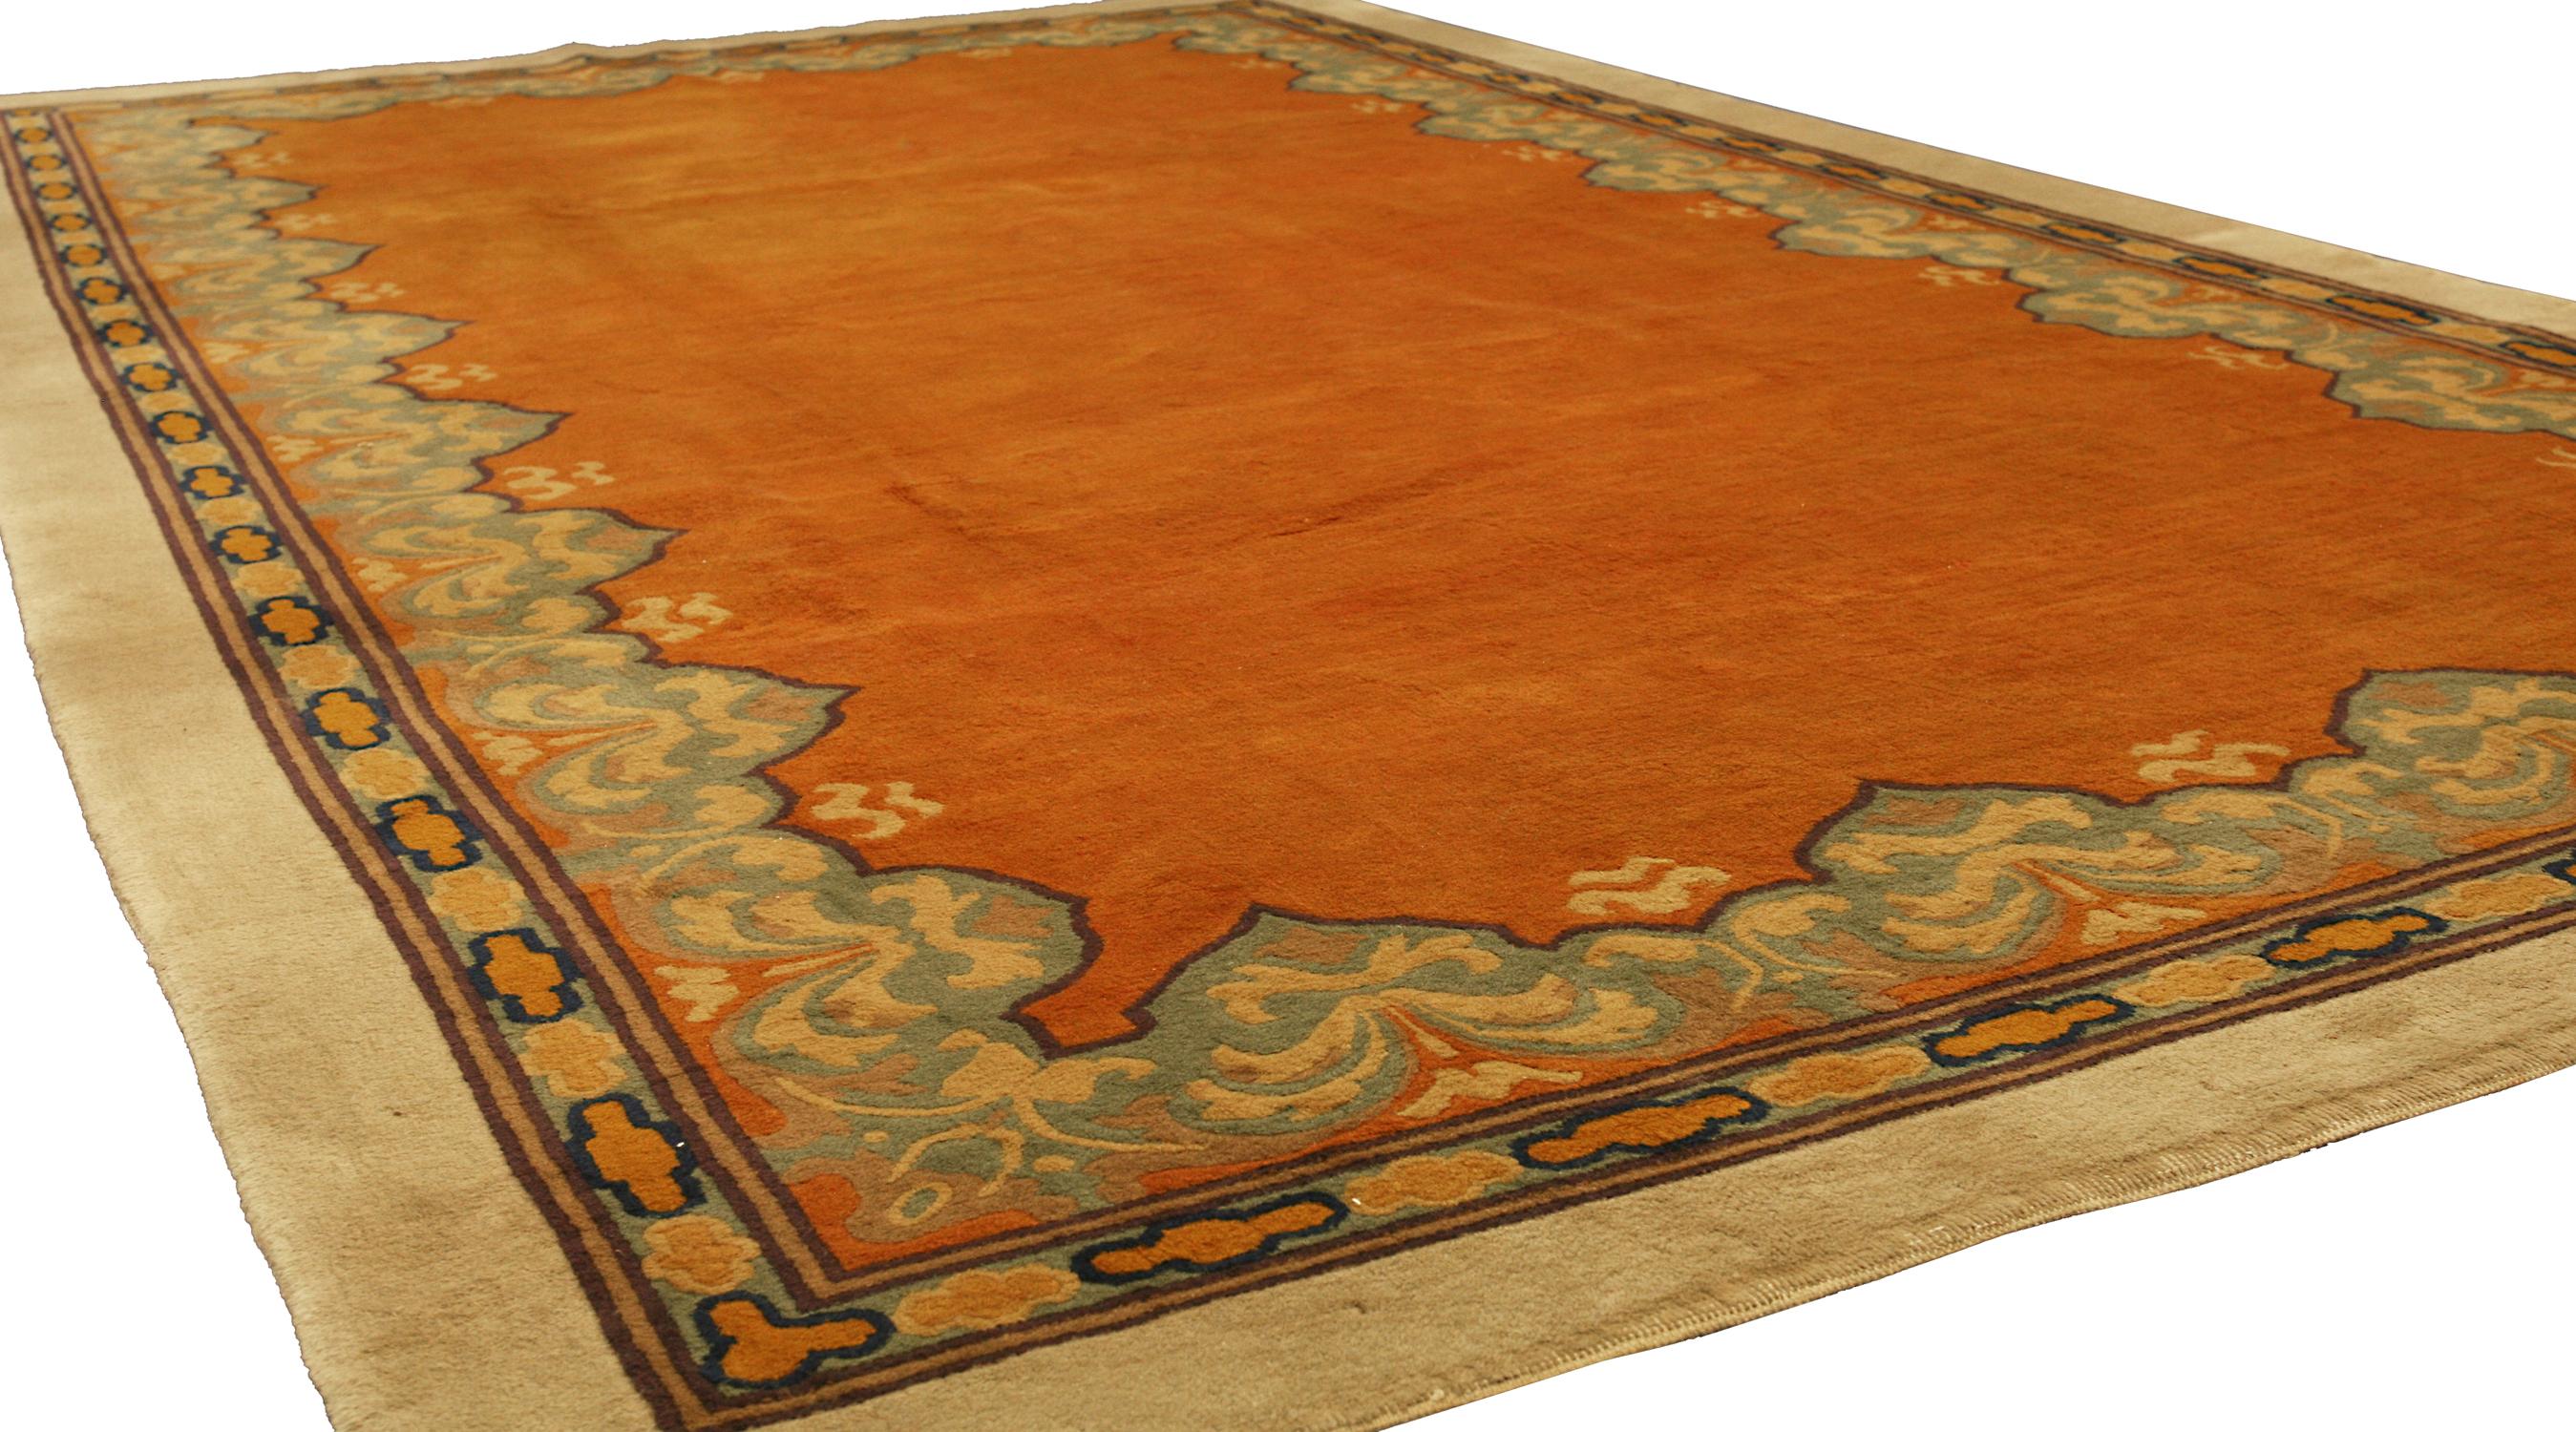 This is a Peking rug from northeast China and it was woven circa 1900 and measures 402 X 240 CM. The design of this rug is highly Minimalist as the field does not have any design; it only has an Art Deco stylized border. This rug is in full pile